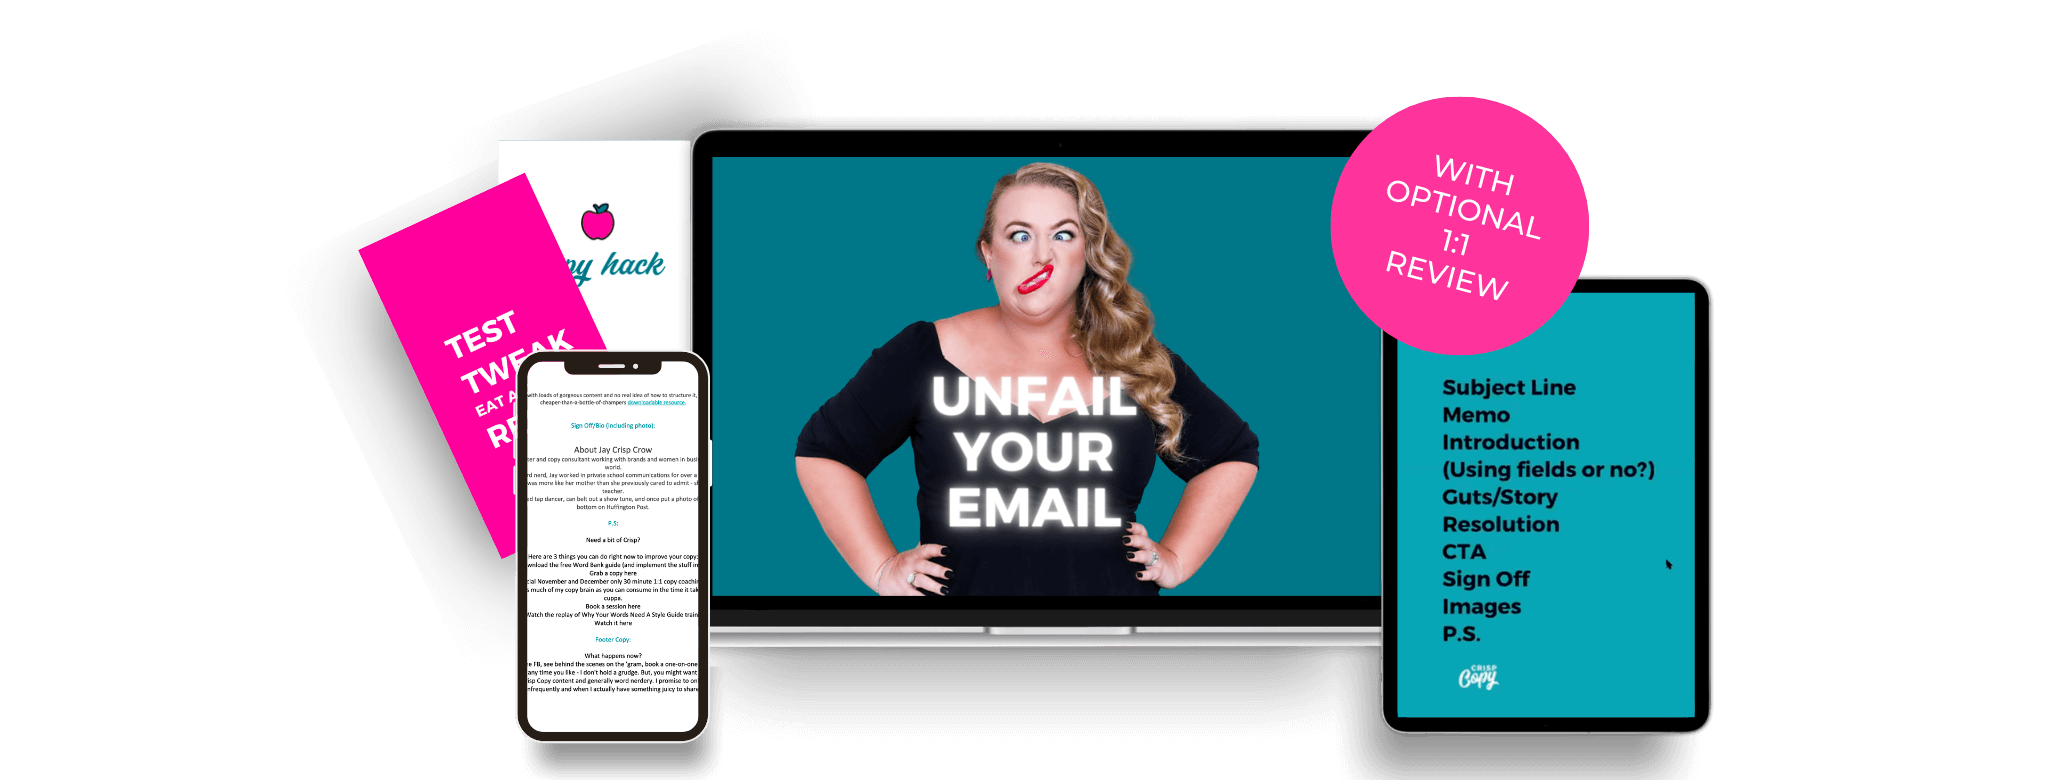 Unfail Your Email Copywriting Course For Women Header